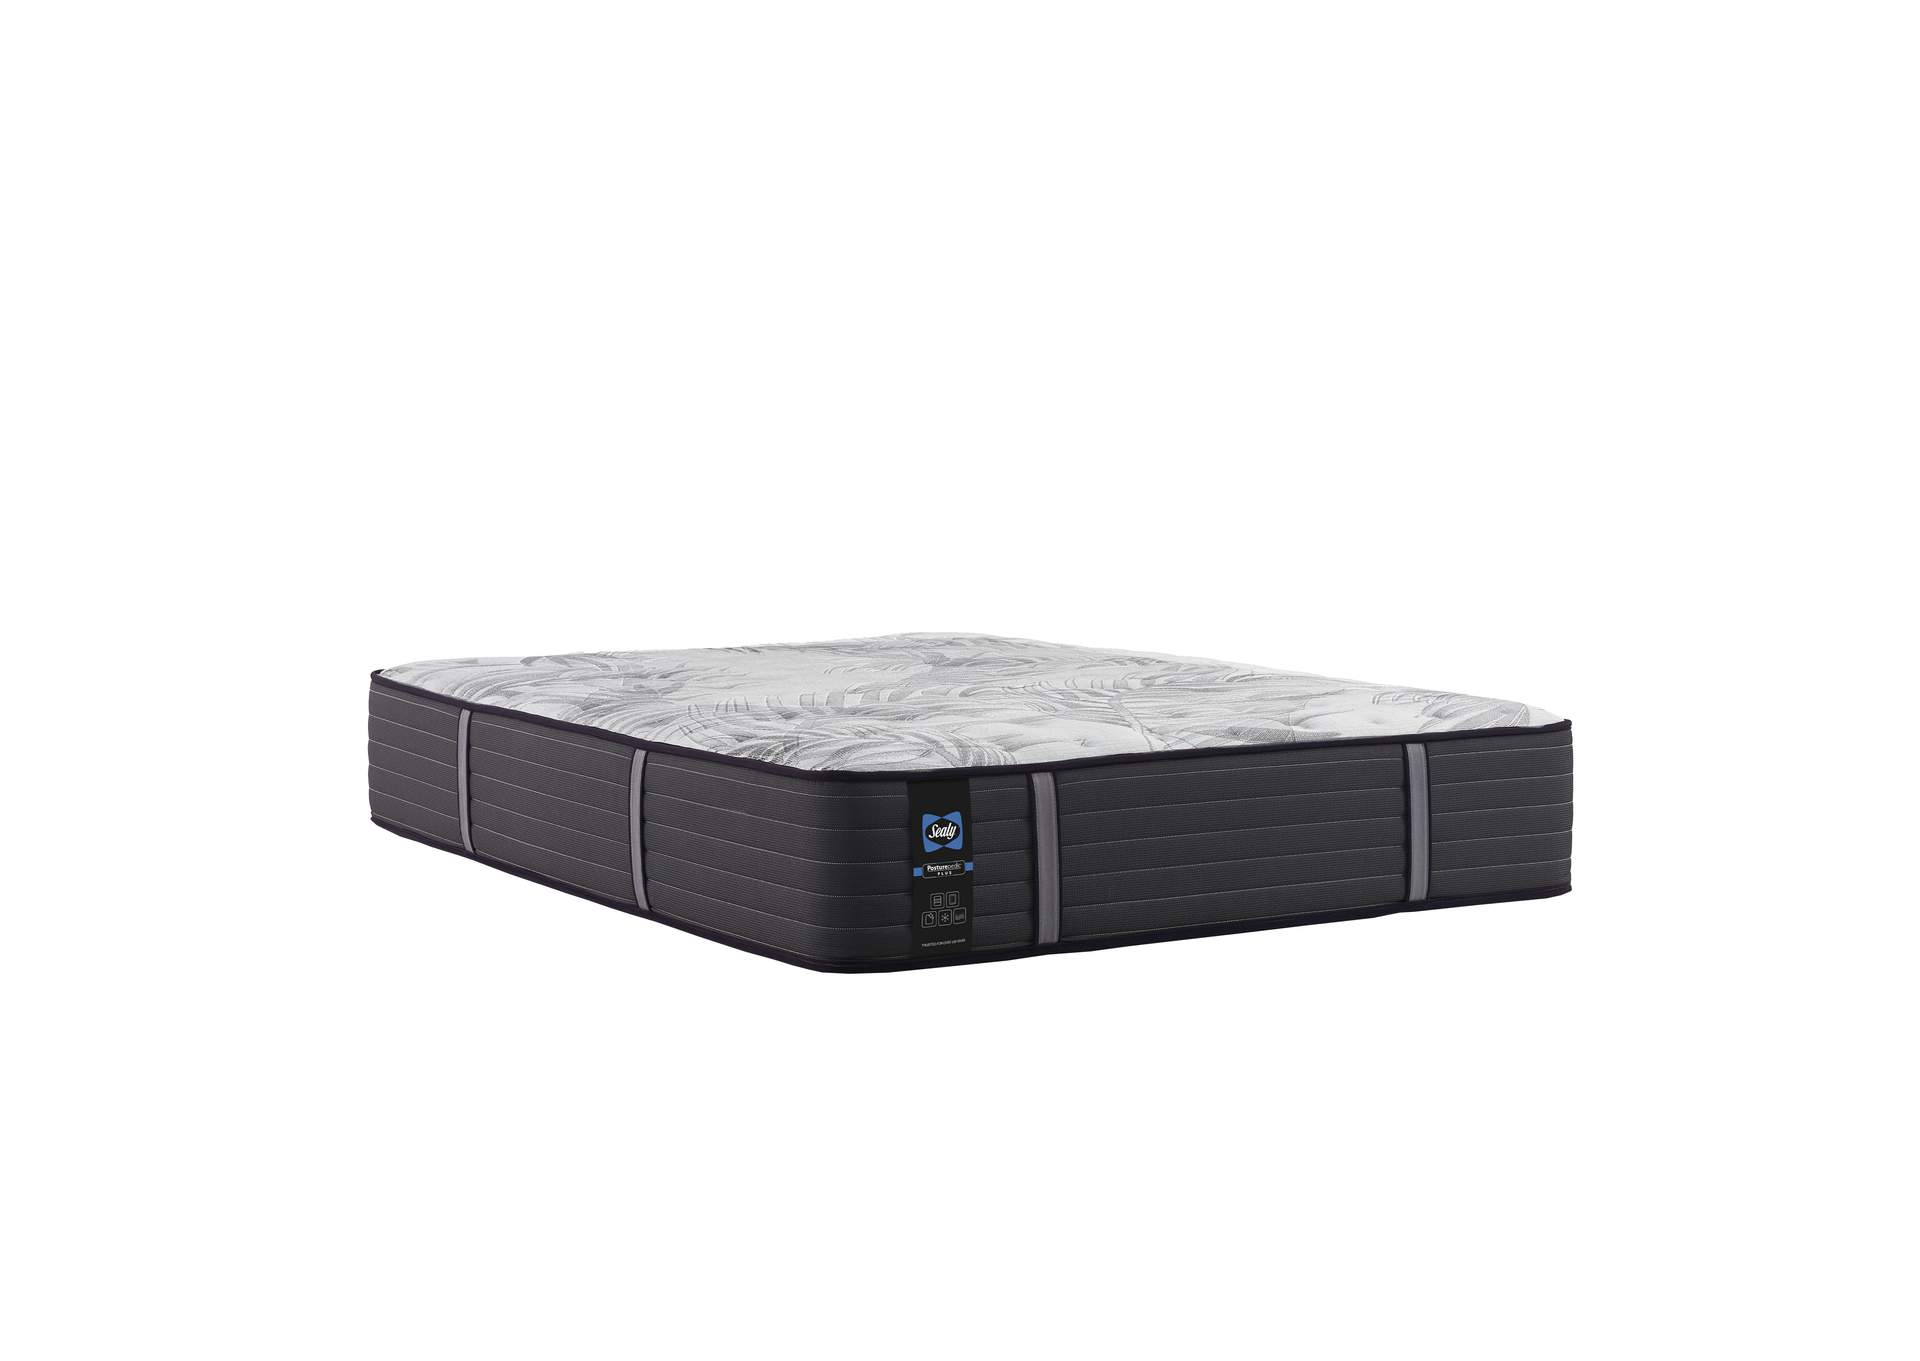 Victorious Soft Tight Top Full Mattress,Sealy